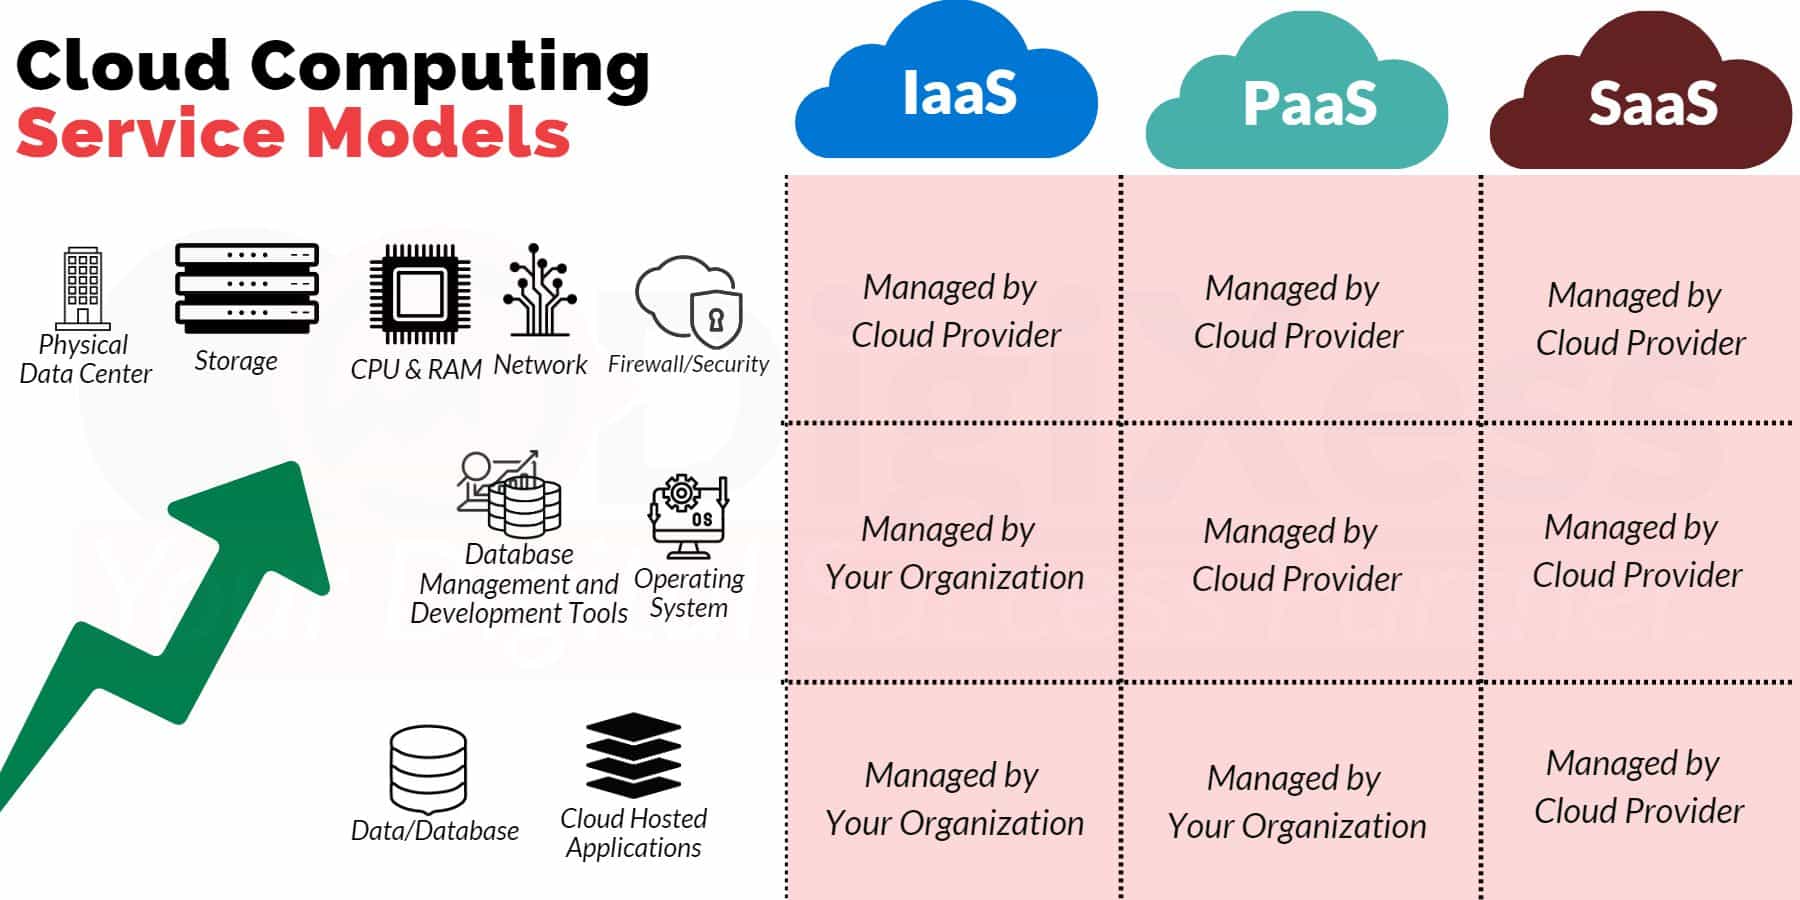 The cloud computing service models explained